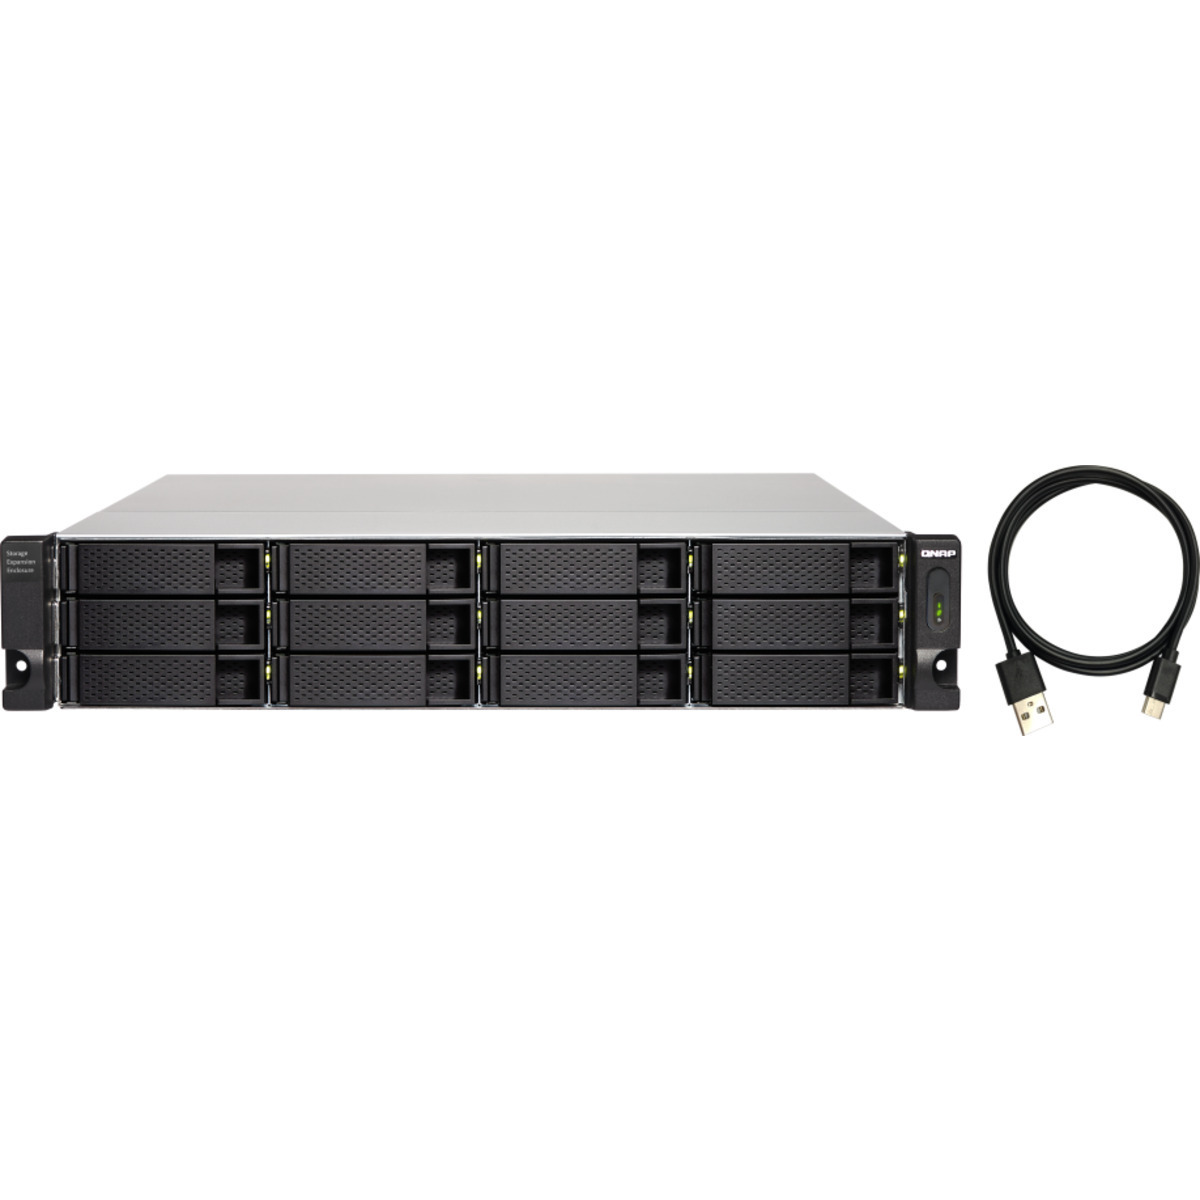 QNAP TL-R1200C-RP External Expansion Drive 192tb 12-Bay RackMount Multimedia / Power User / Business Expansion Enclosure 12x16tb Western Digital Ultrastar DC HC550 WUH721816ALE6L4 3.5 7200rpm SATA 6Gb/s HDD ENTERPRISE Class Drives Installed - Burn-In Tested TL-R1200C-RP External Expansion Drive